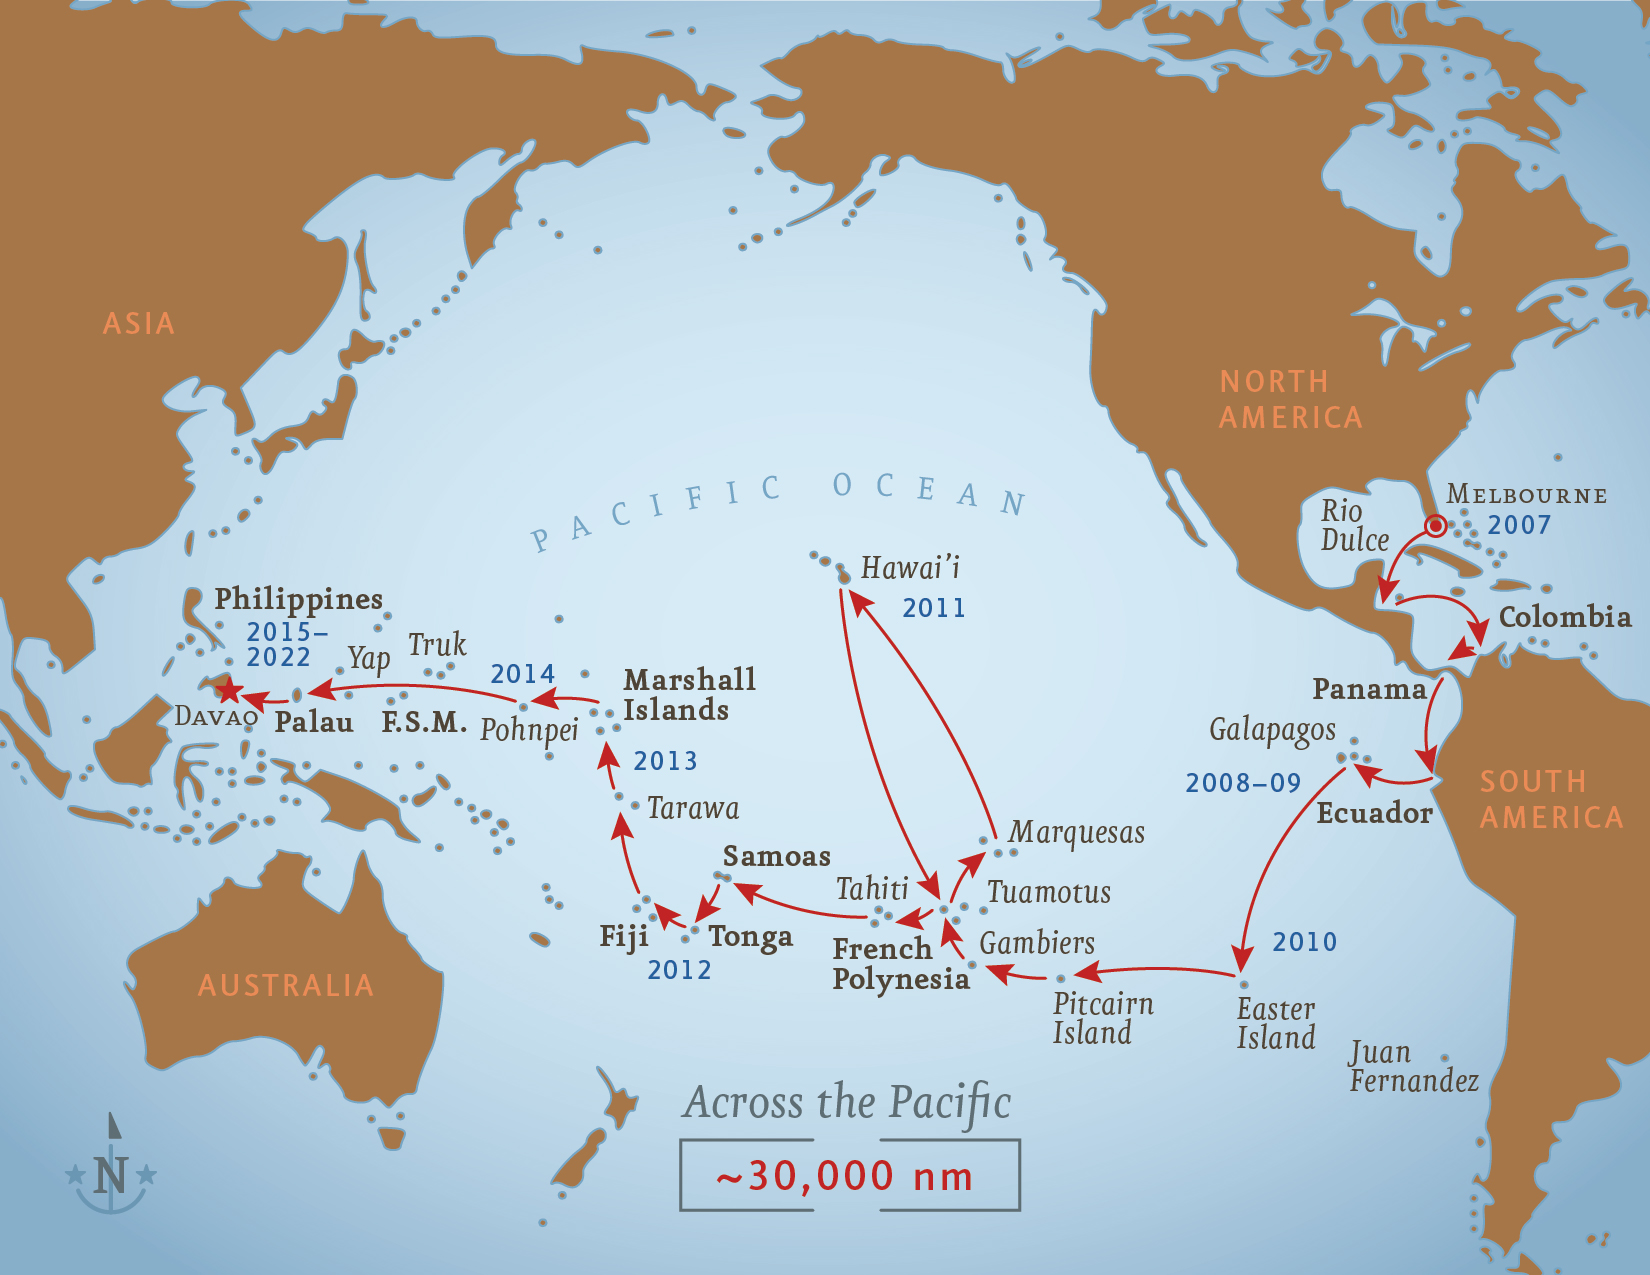 Our Route across the Pacific